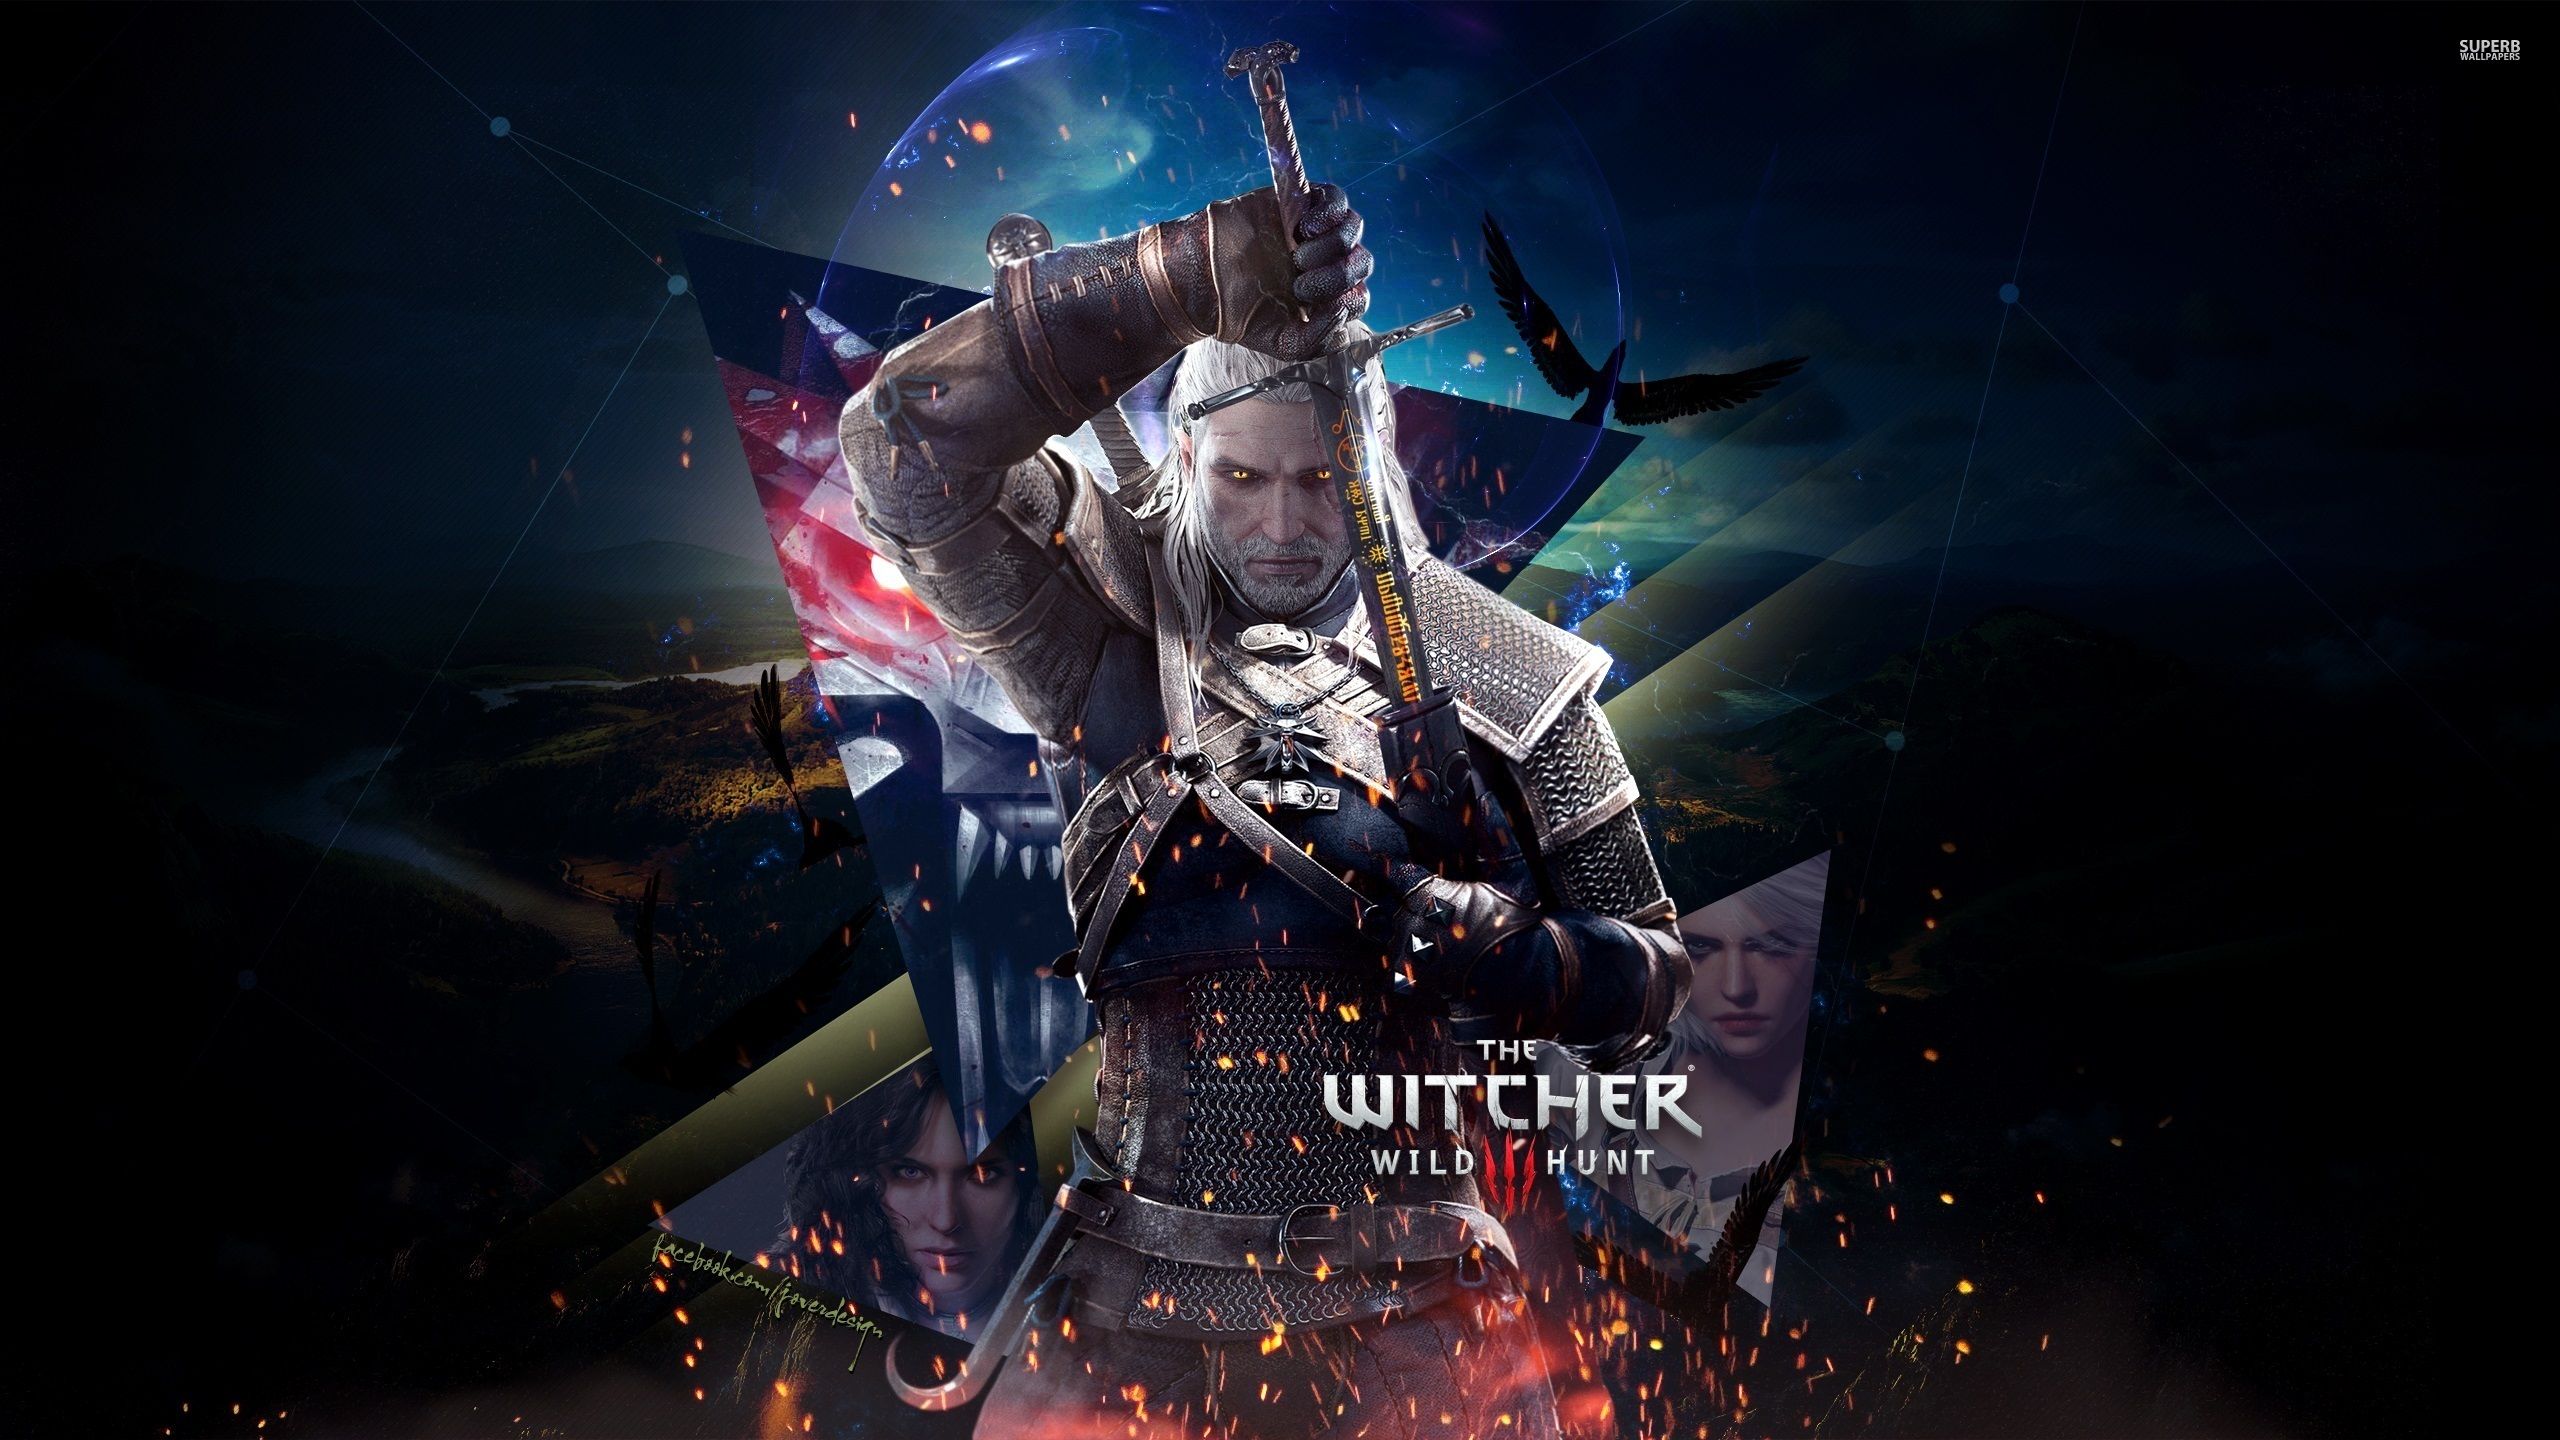 The Witcher 3 Wild Hunt wallpaper - Game wallpapers -